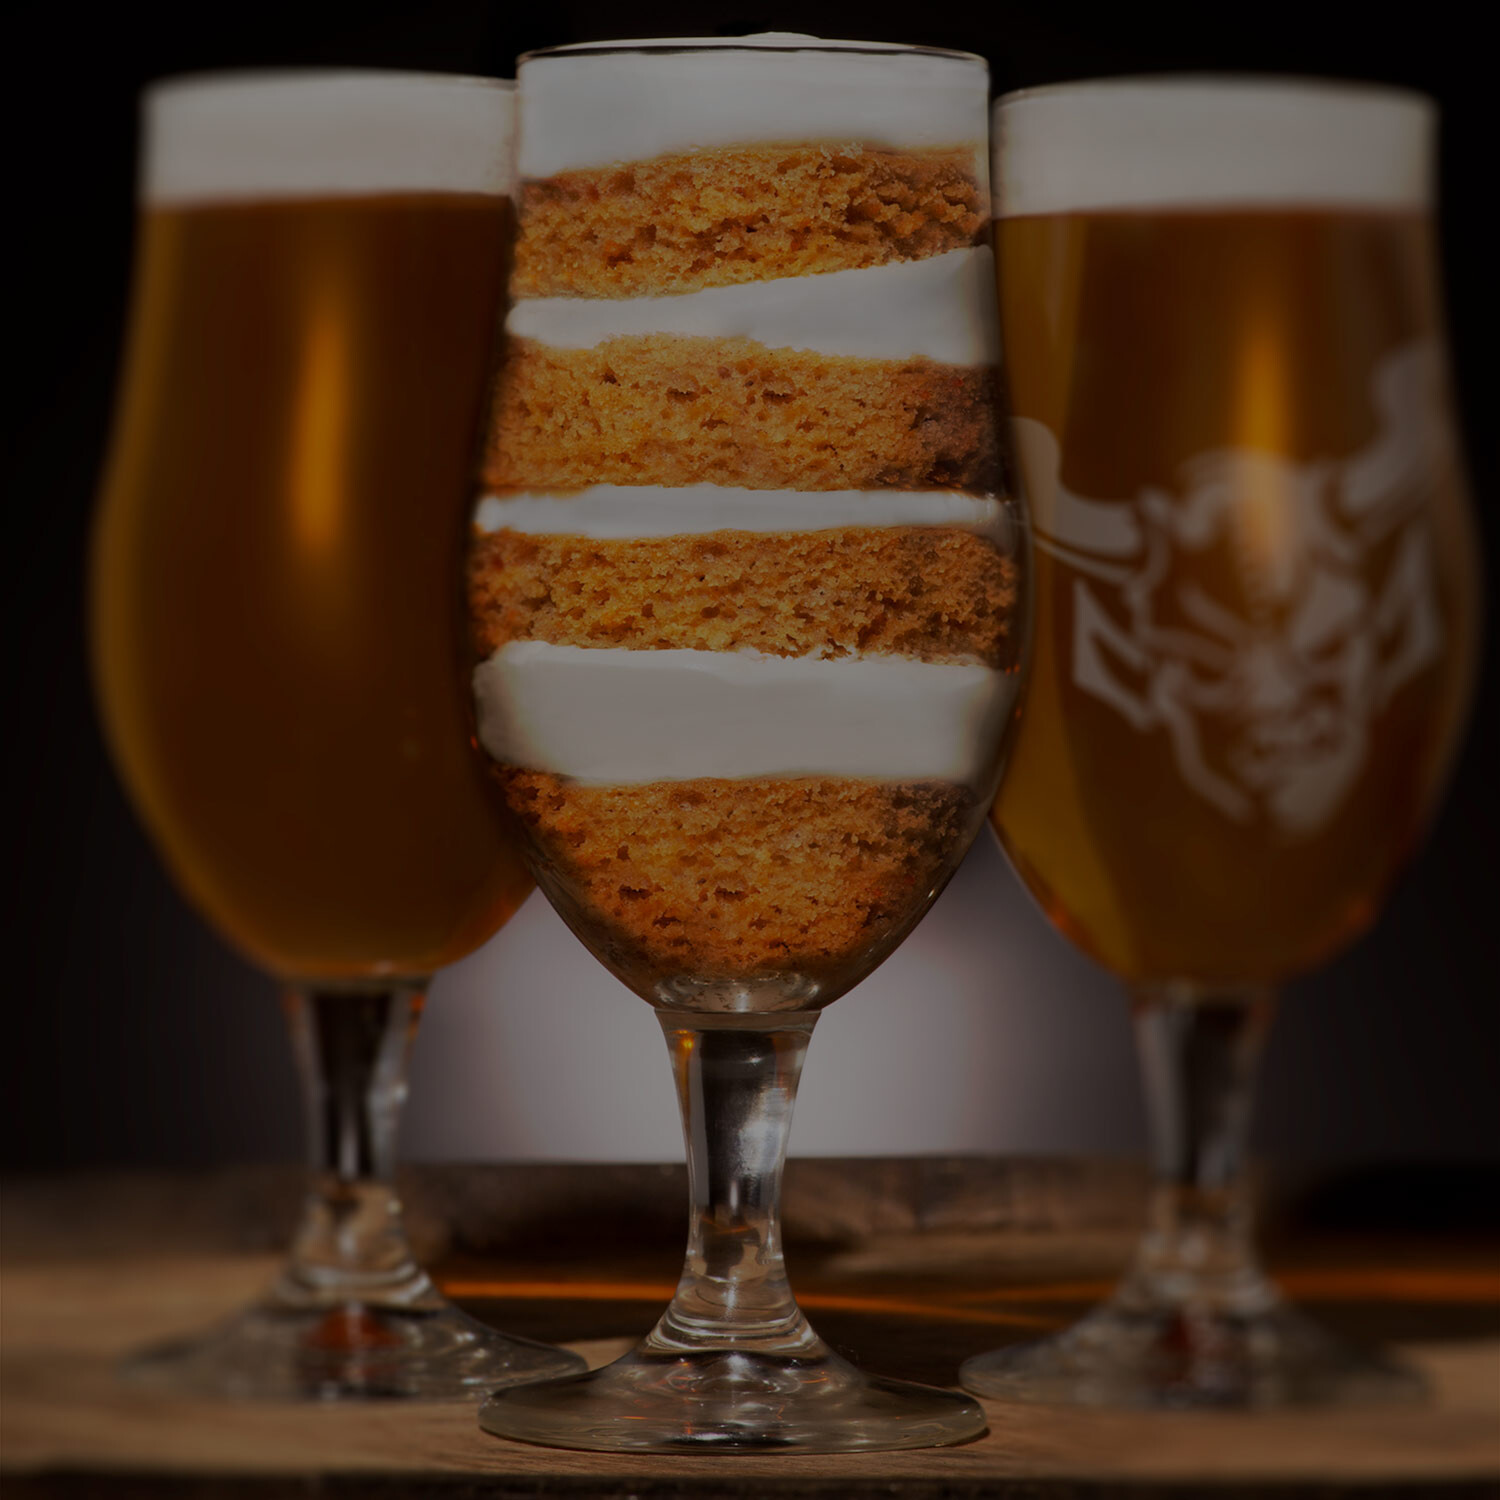 glass of carrot cake flanked by glasses of Juli Goldenberg / Monkey Paw / Stone 24 Carrot Golden Ale